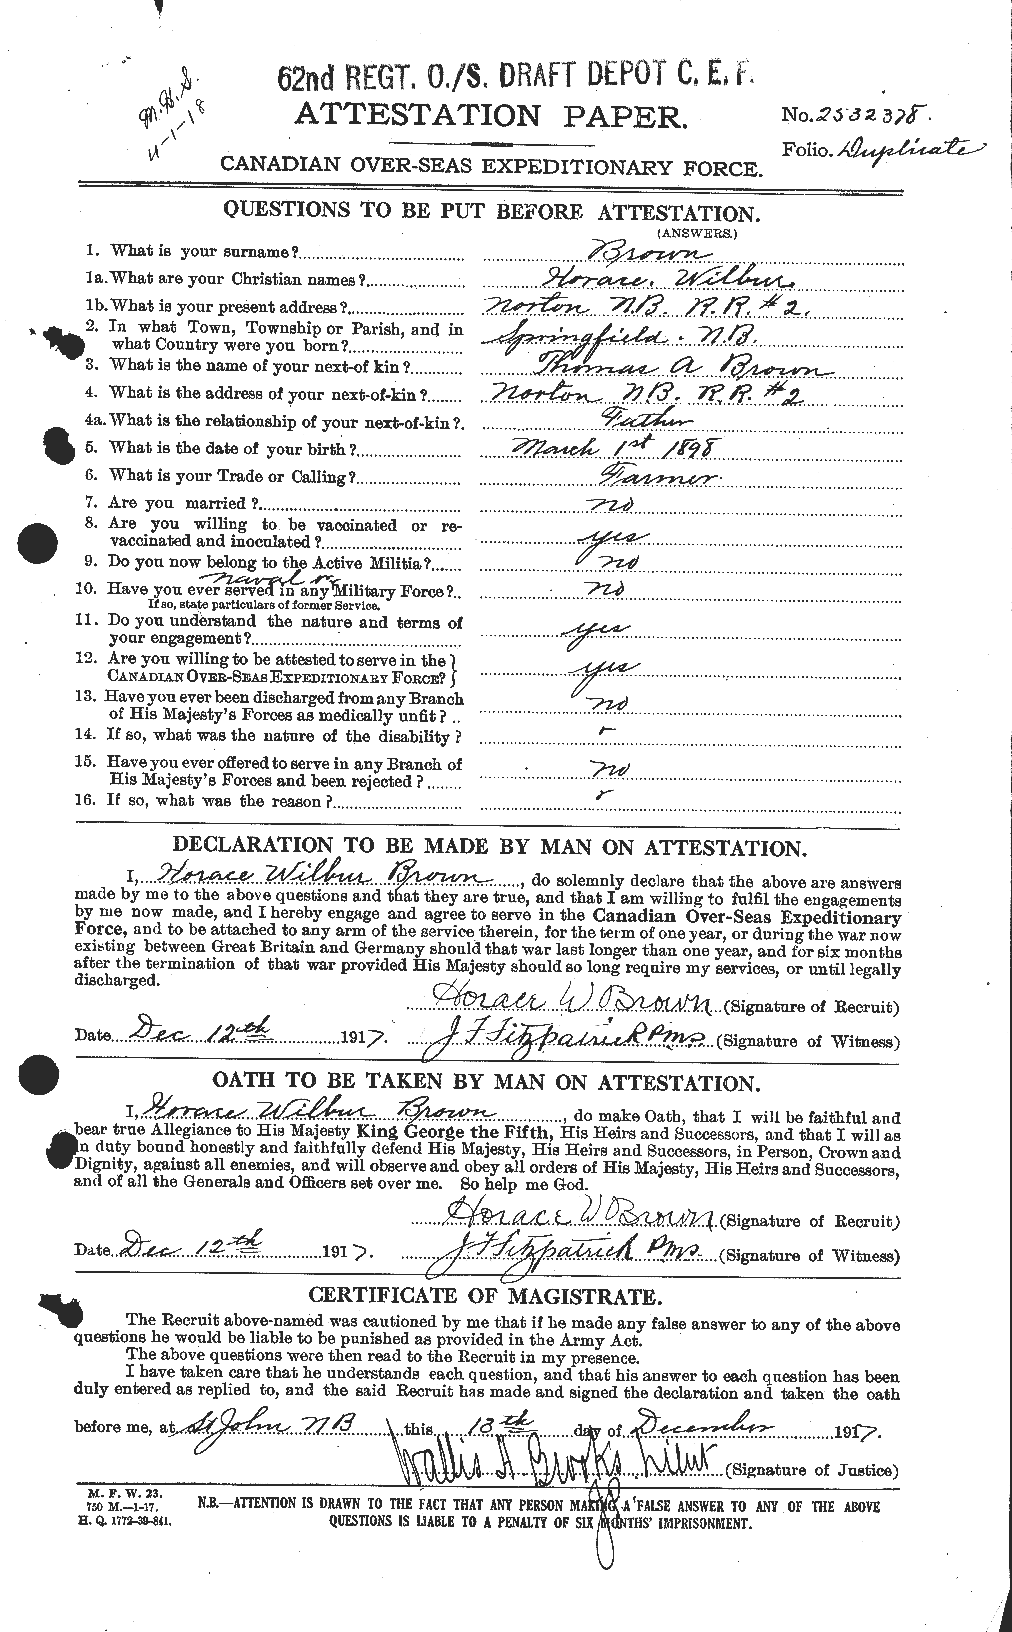 Personnel Records of the First World War - CEF 265610a